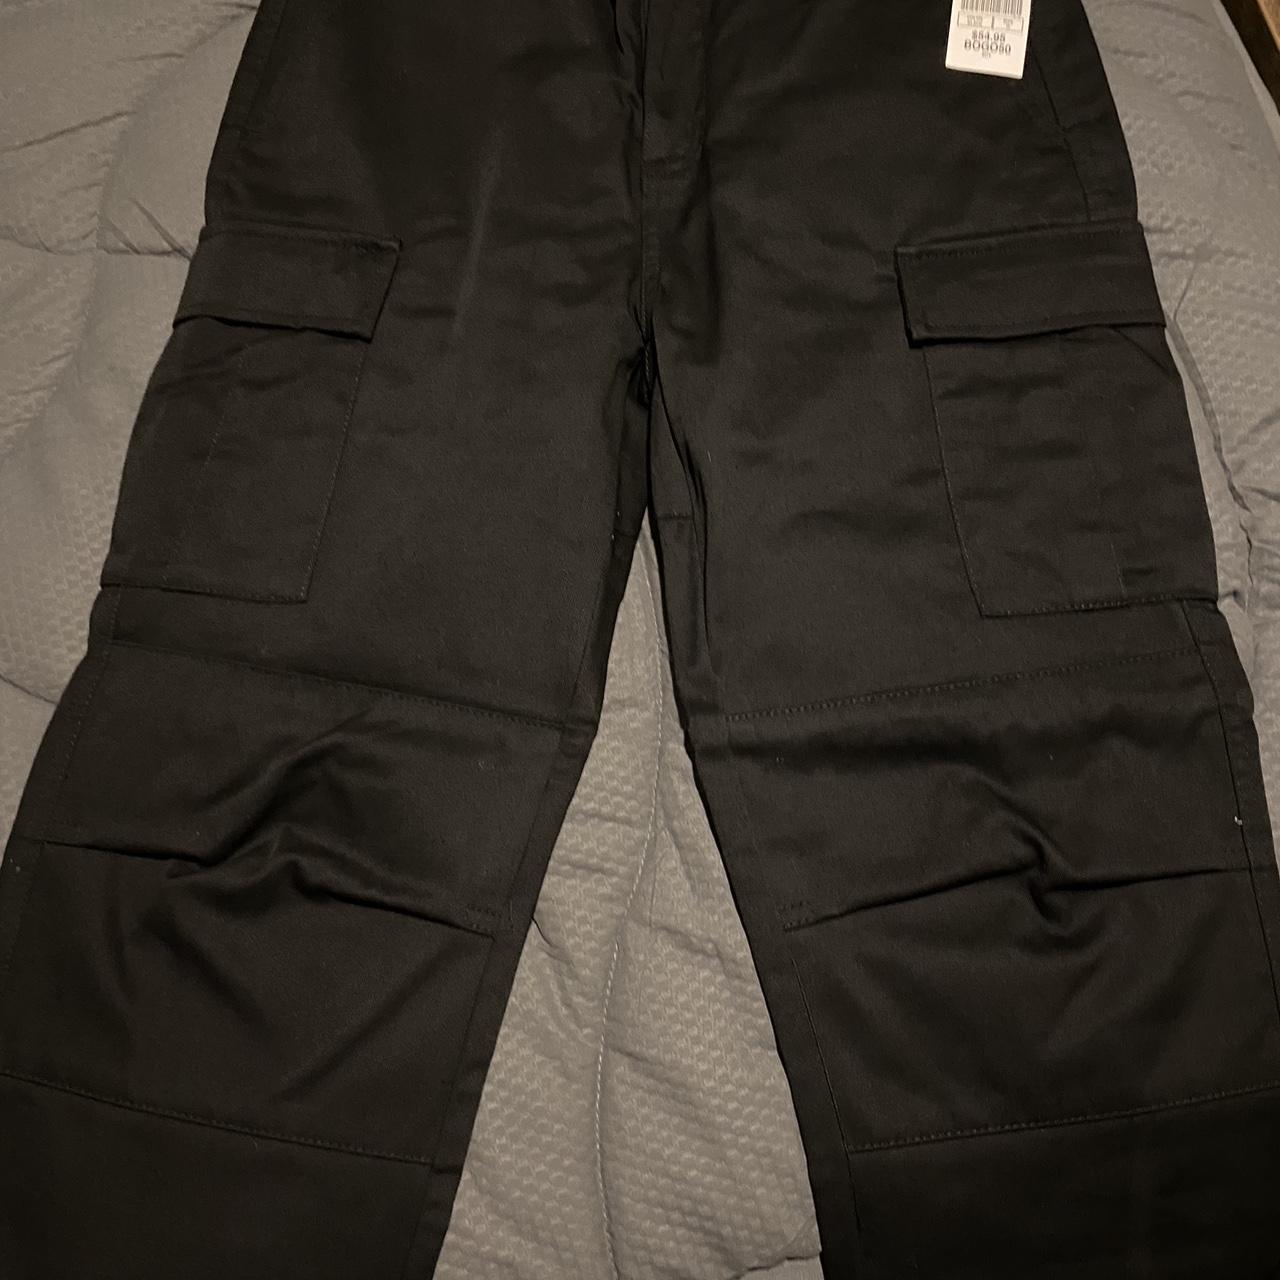 Brand new Empyre cargo pants did not fit perfect... - Depop